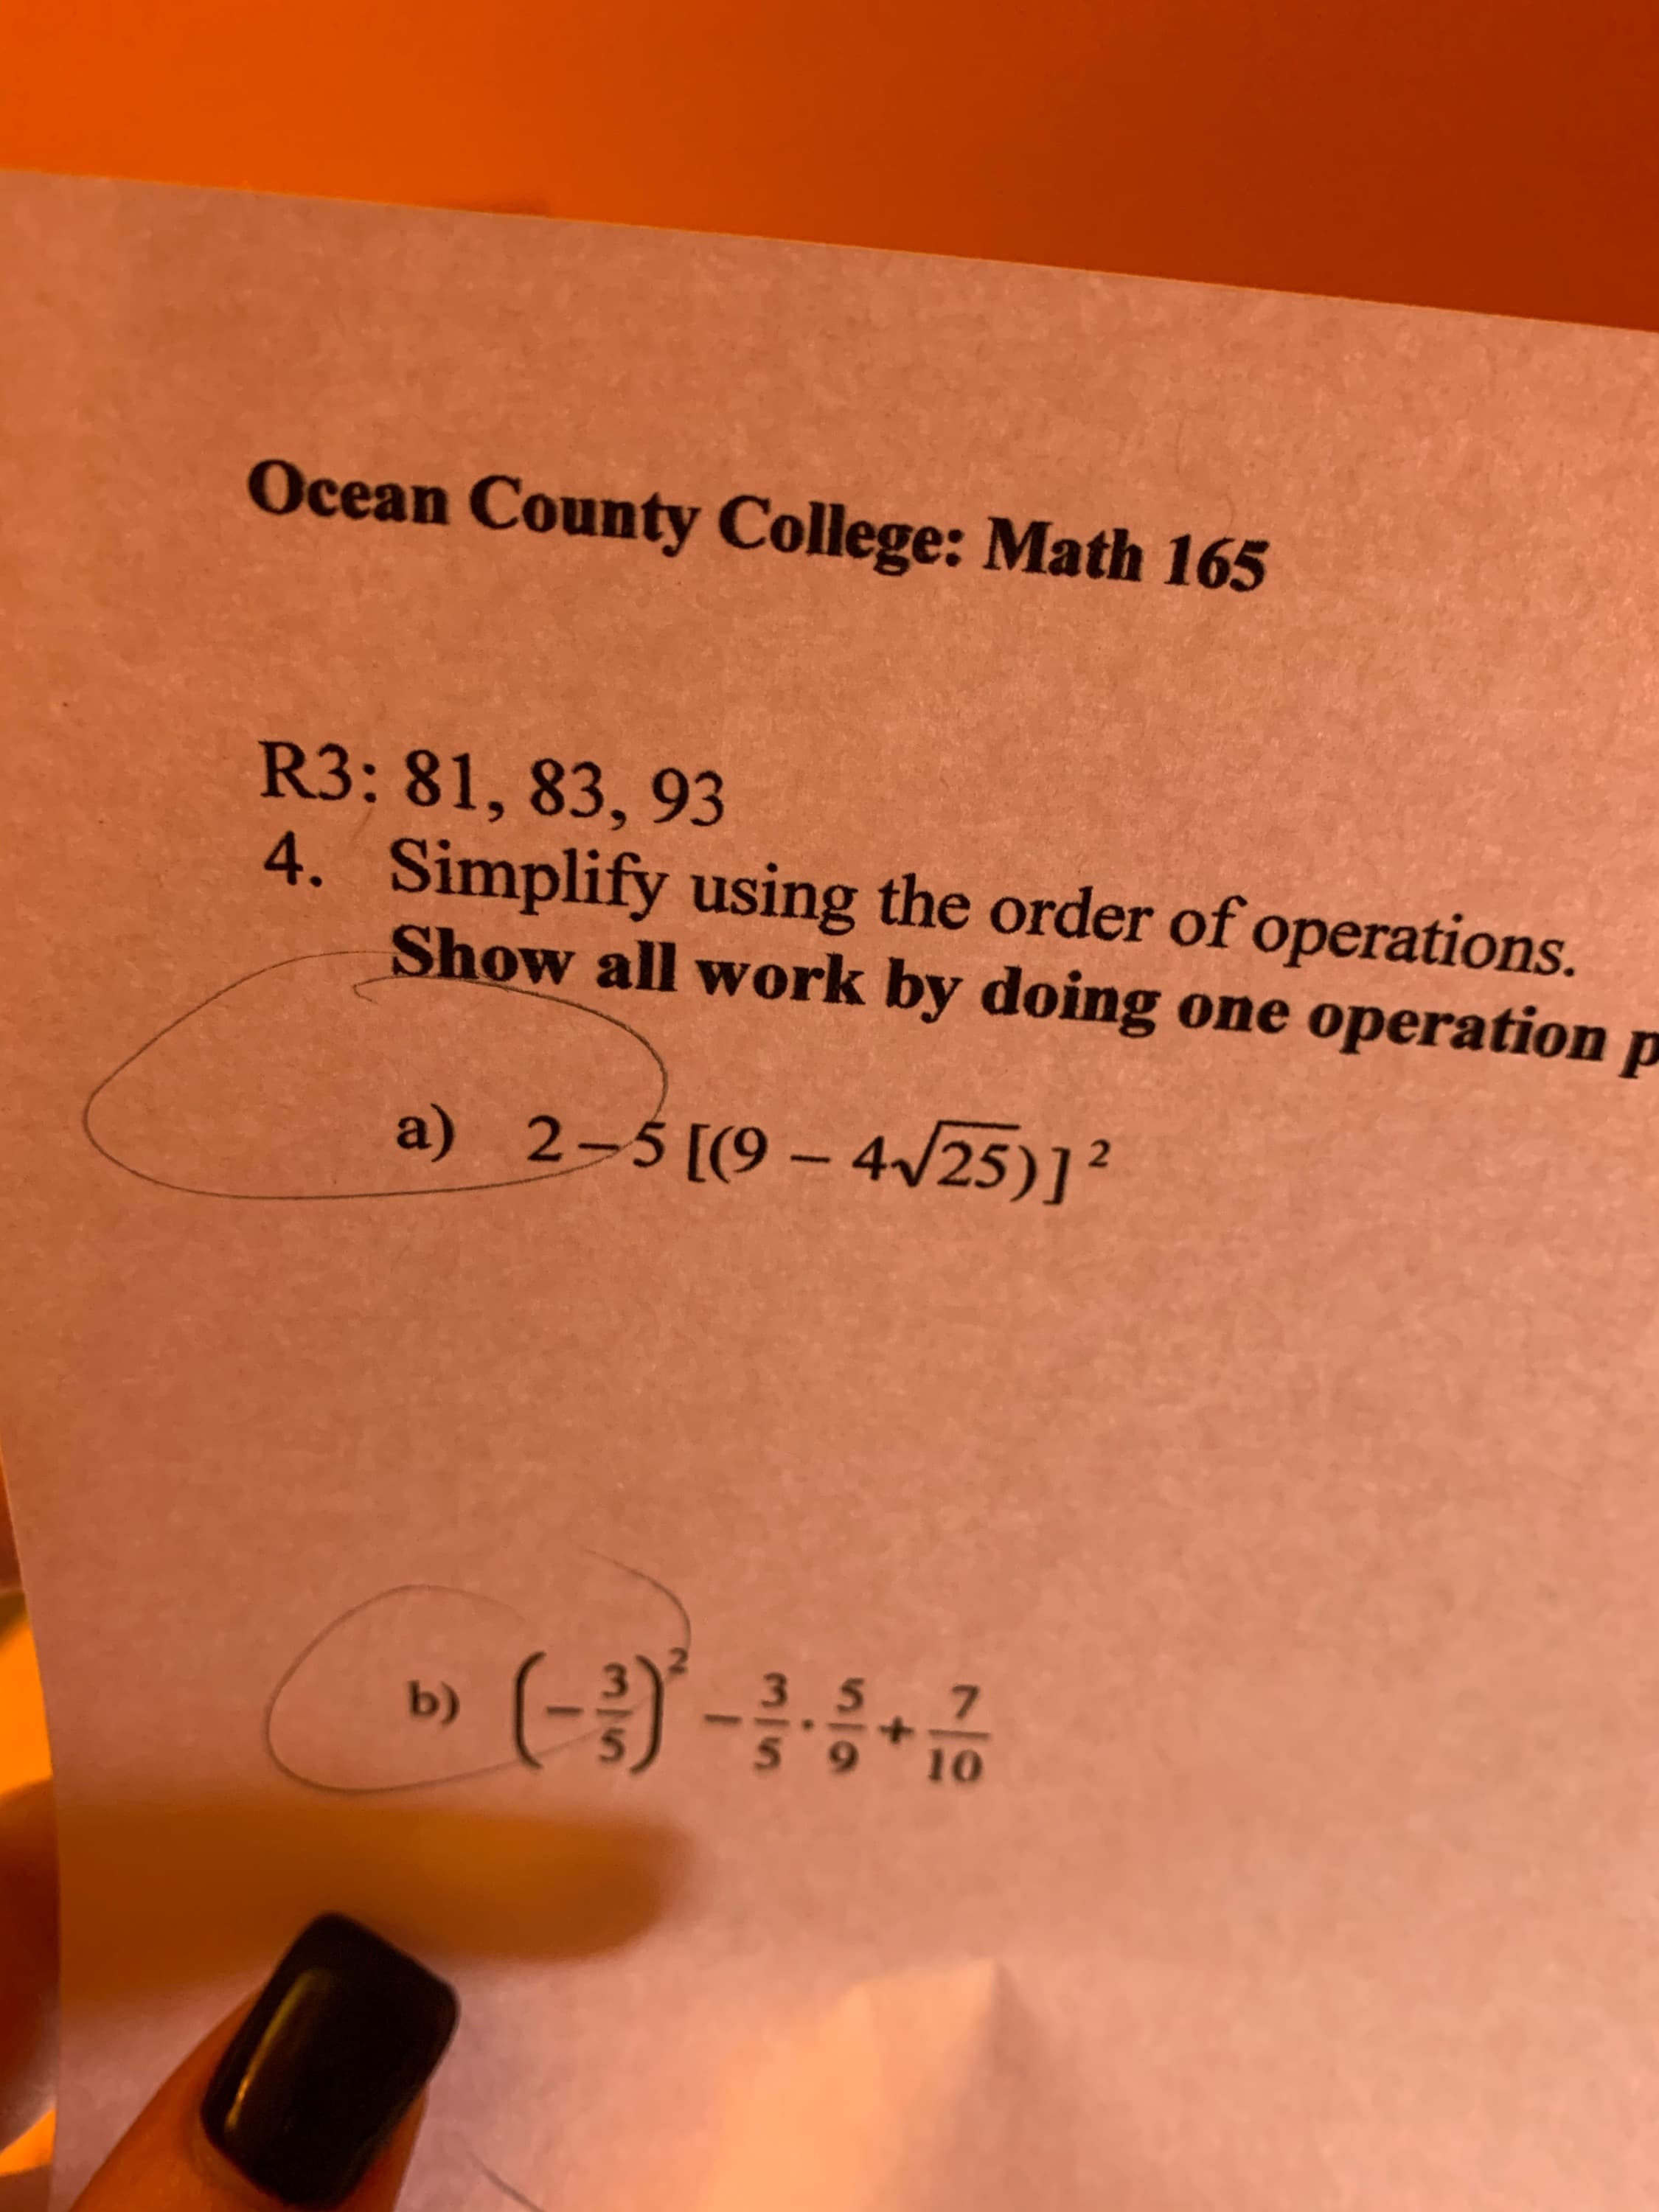 Ocean County College: Math 165
R3: 81, 83, 93
4. Simplify using the order of operations.
Show all work by doing one operation p
a) 2-5[(9 – 4/25)]?
(-)-
357
59 10
b)
